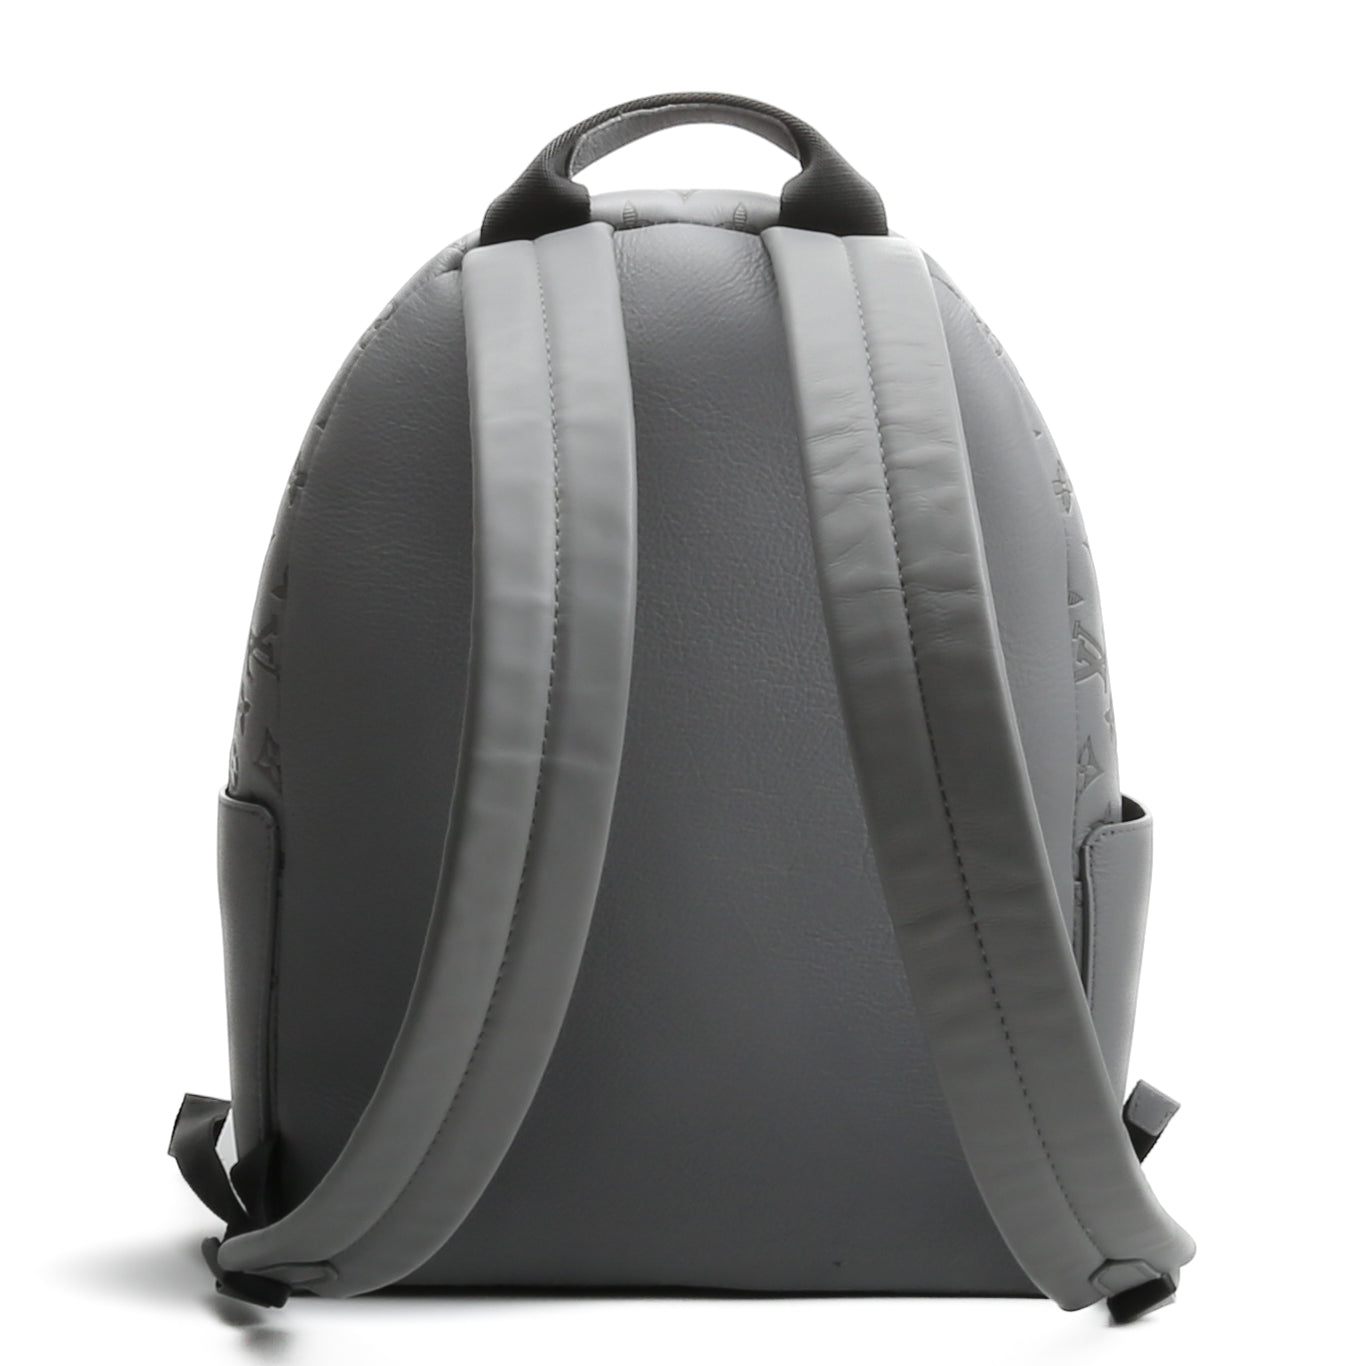 LOUIS VUITTON Discovery Backpack - Anthracite Gray